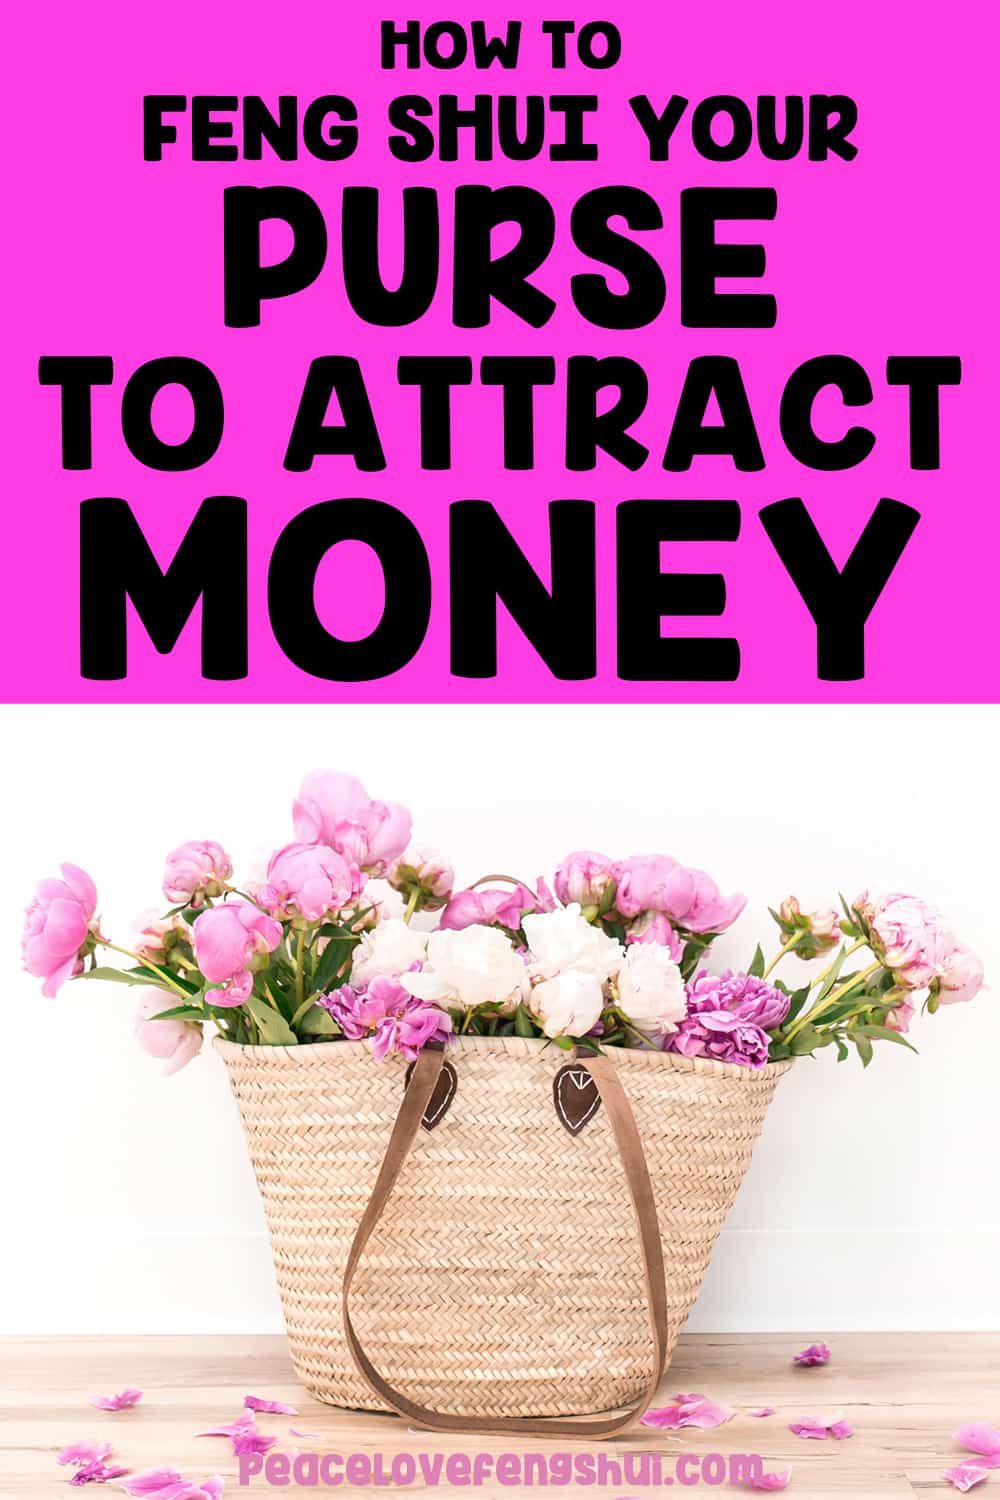 how to feng shui your purse to attract money (straw purse full of pink peonies)